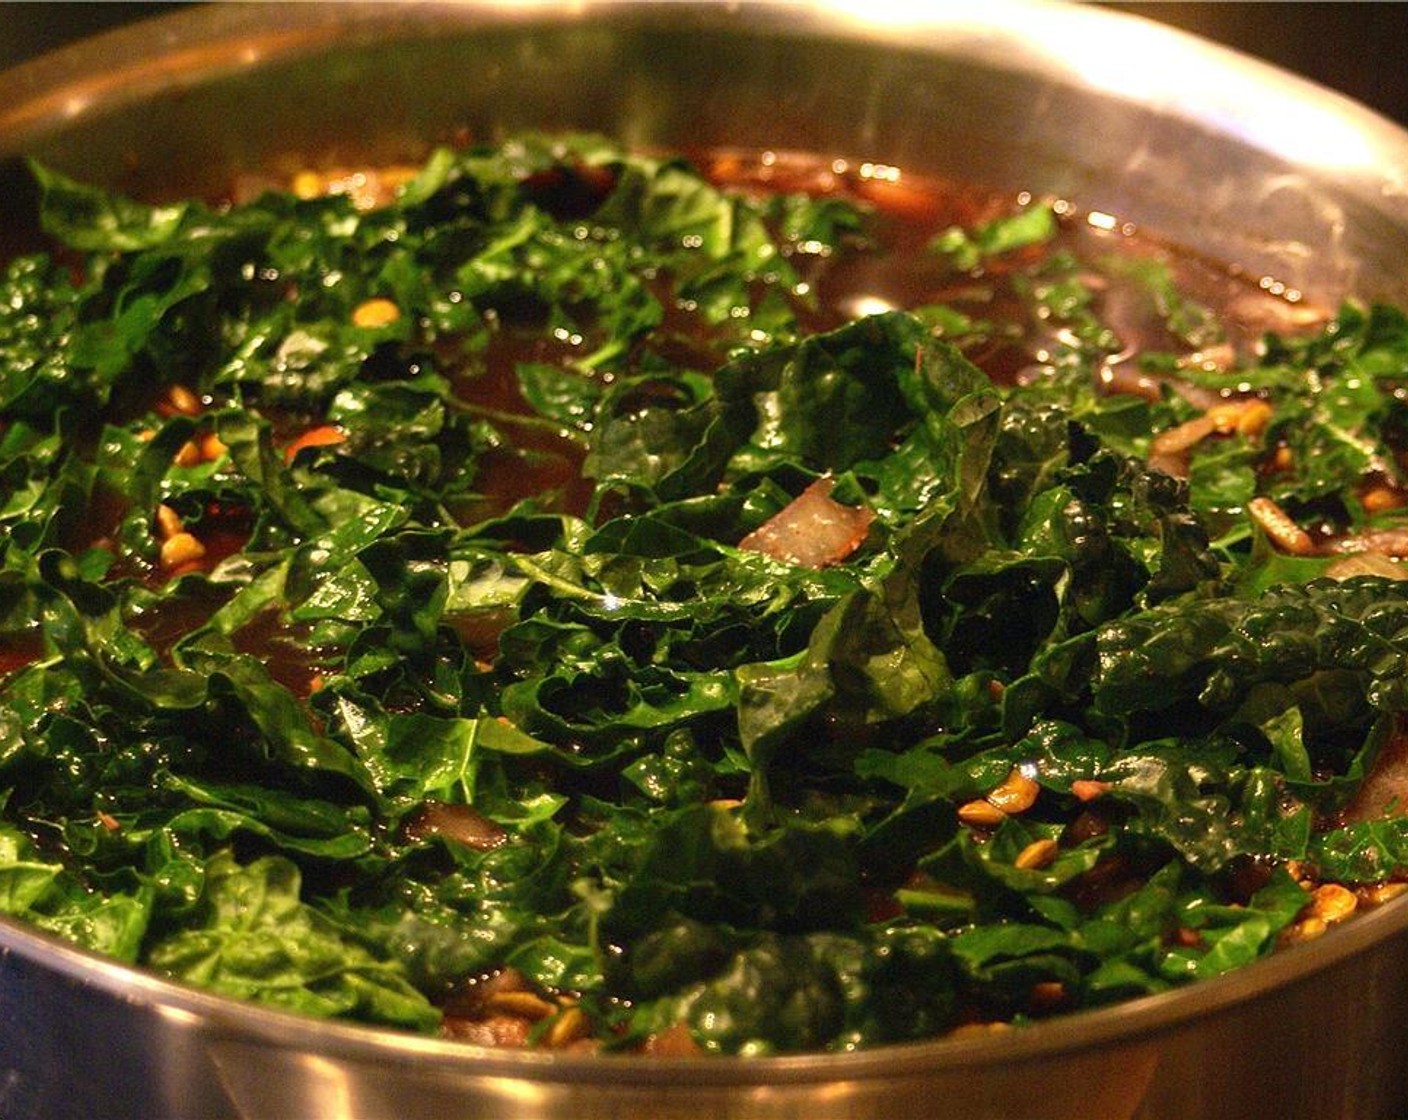 step 6 Add the Baby Kale (4 cups) and cook covered for another 5 minutes, or until most of the water is absorbed.